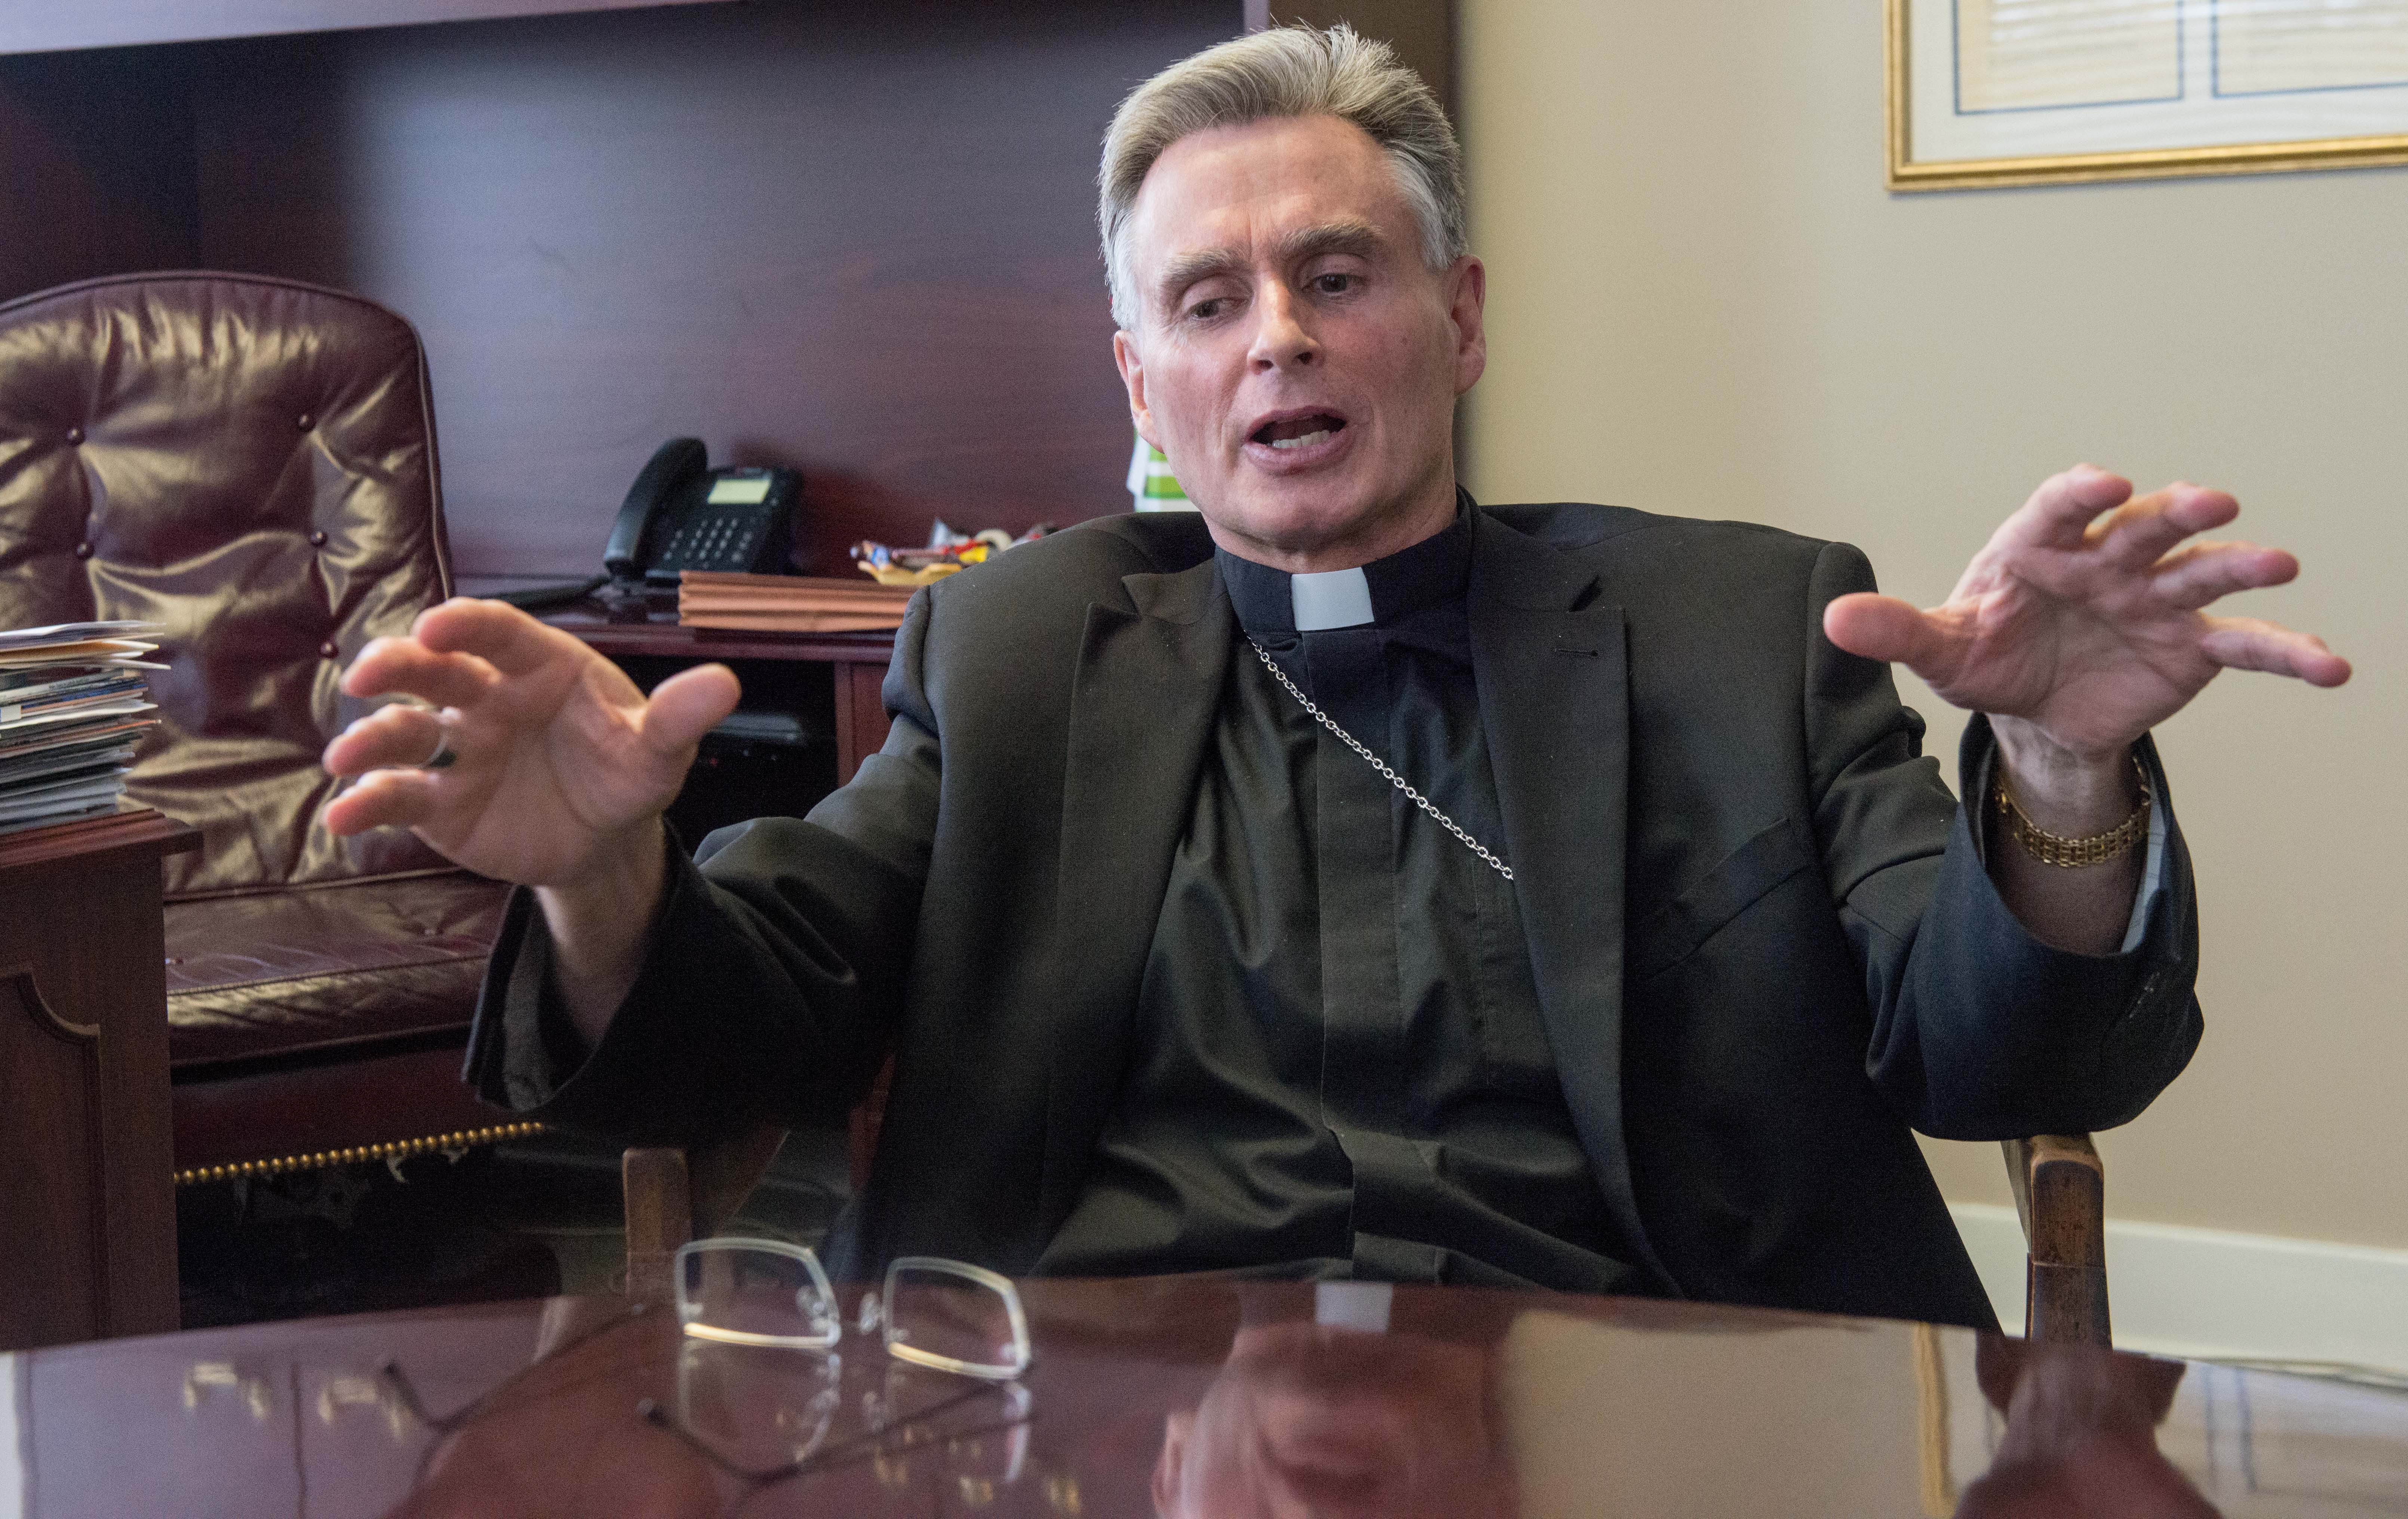 Spokane Gay Porn - Bishop Daly distances Spokane Diocese from group trying to dig up dirt on  Cardinal Cupich | Local News | Spokane | The Pacific Northwest Inlander |  News, Politics, Music, Calendar, Events in